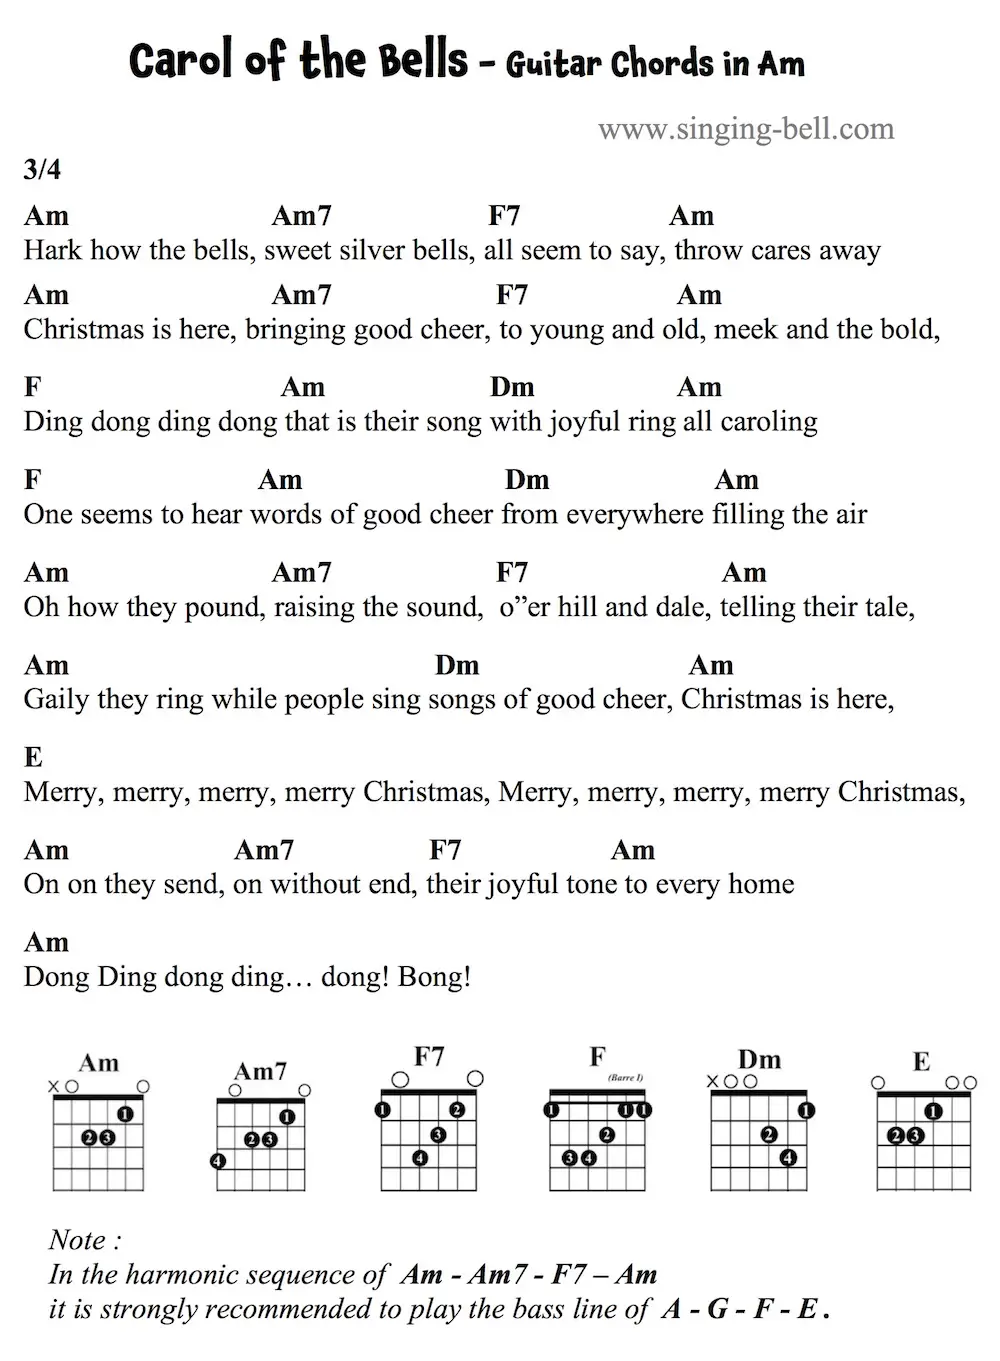 Carol of the bells - Guitar chords and tabs in Am.